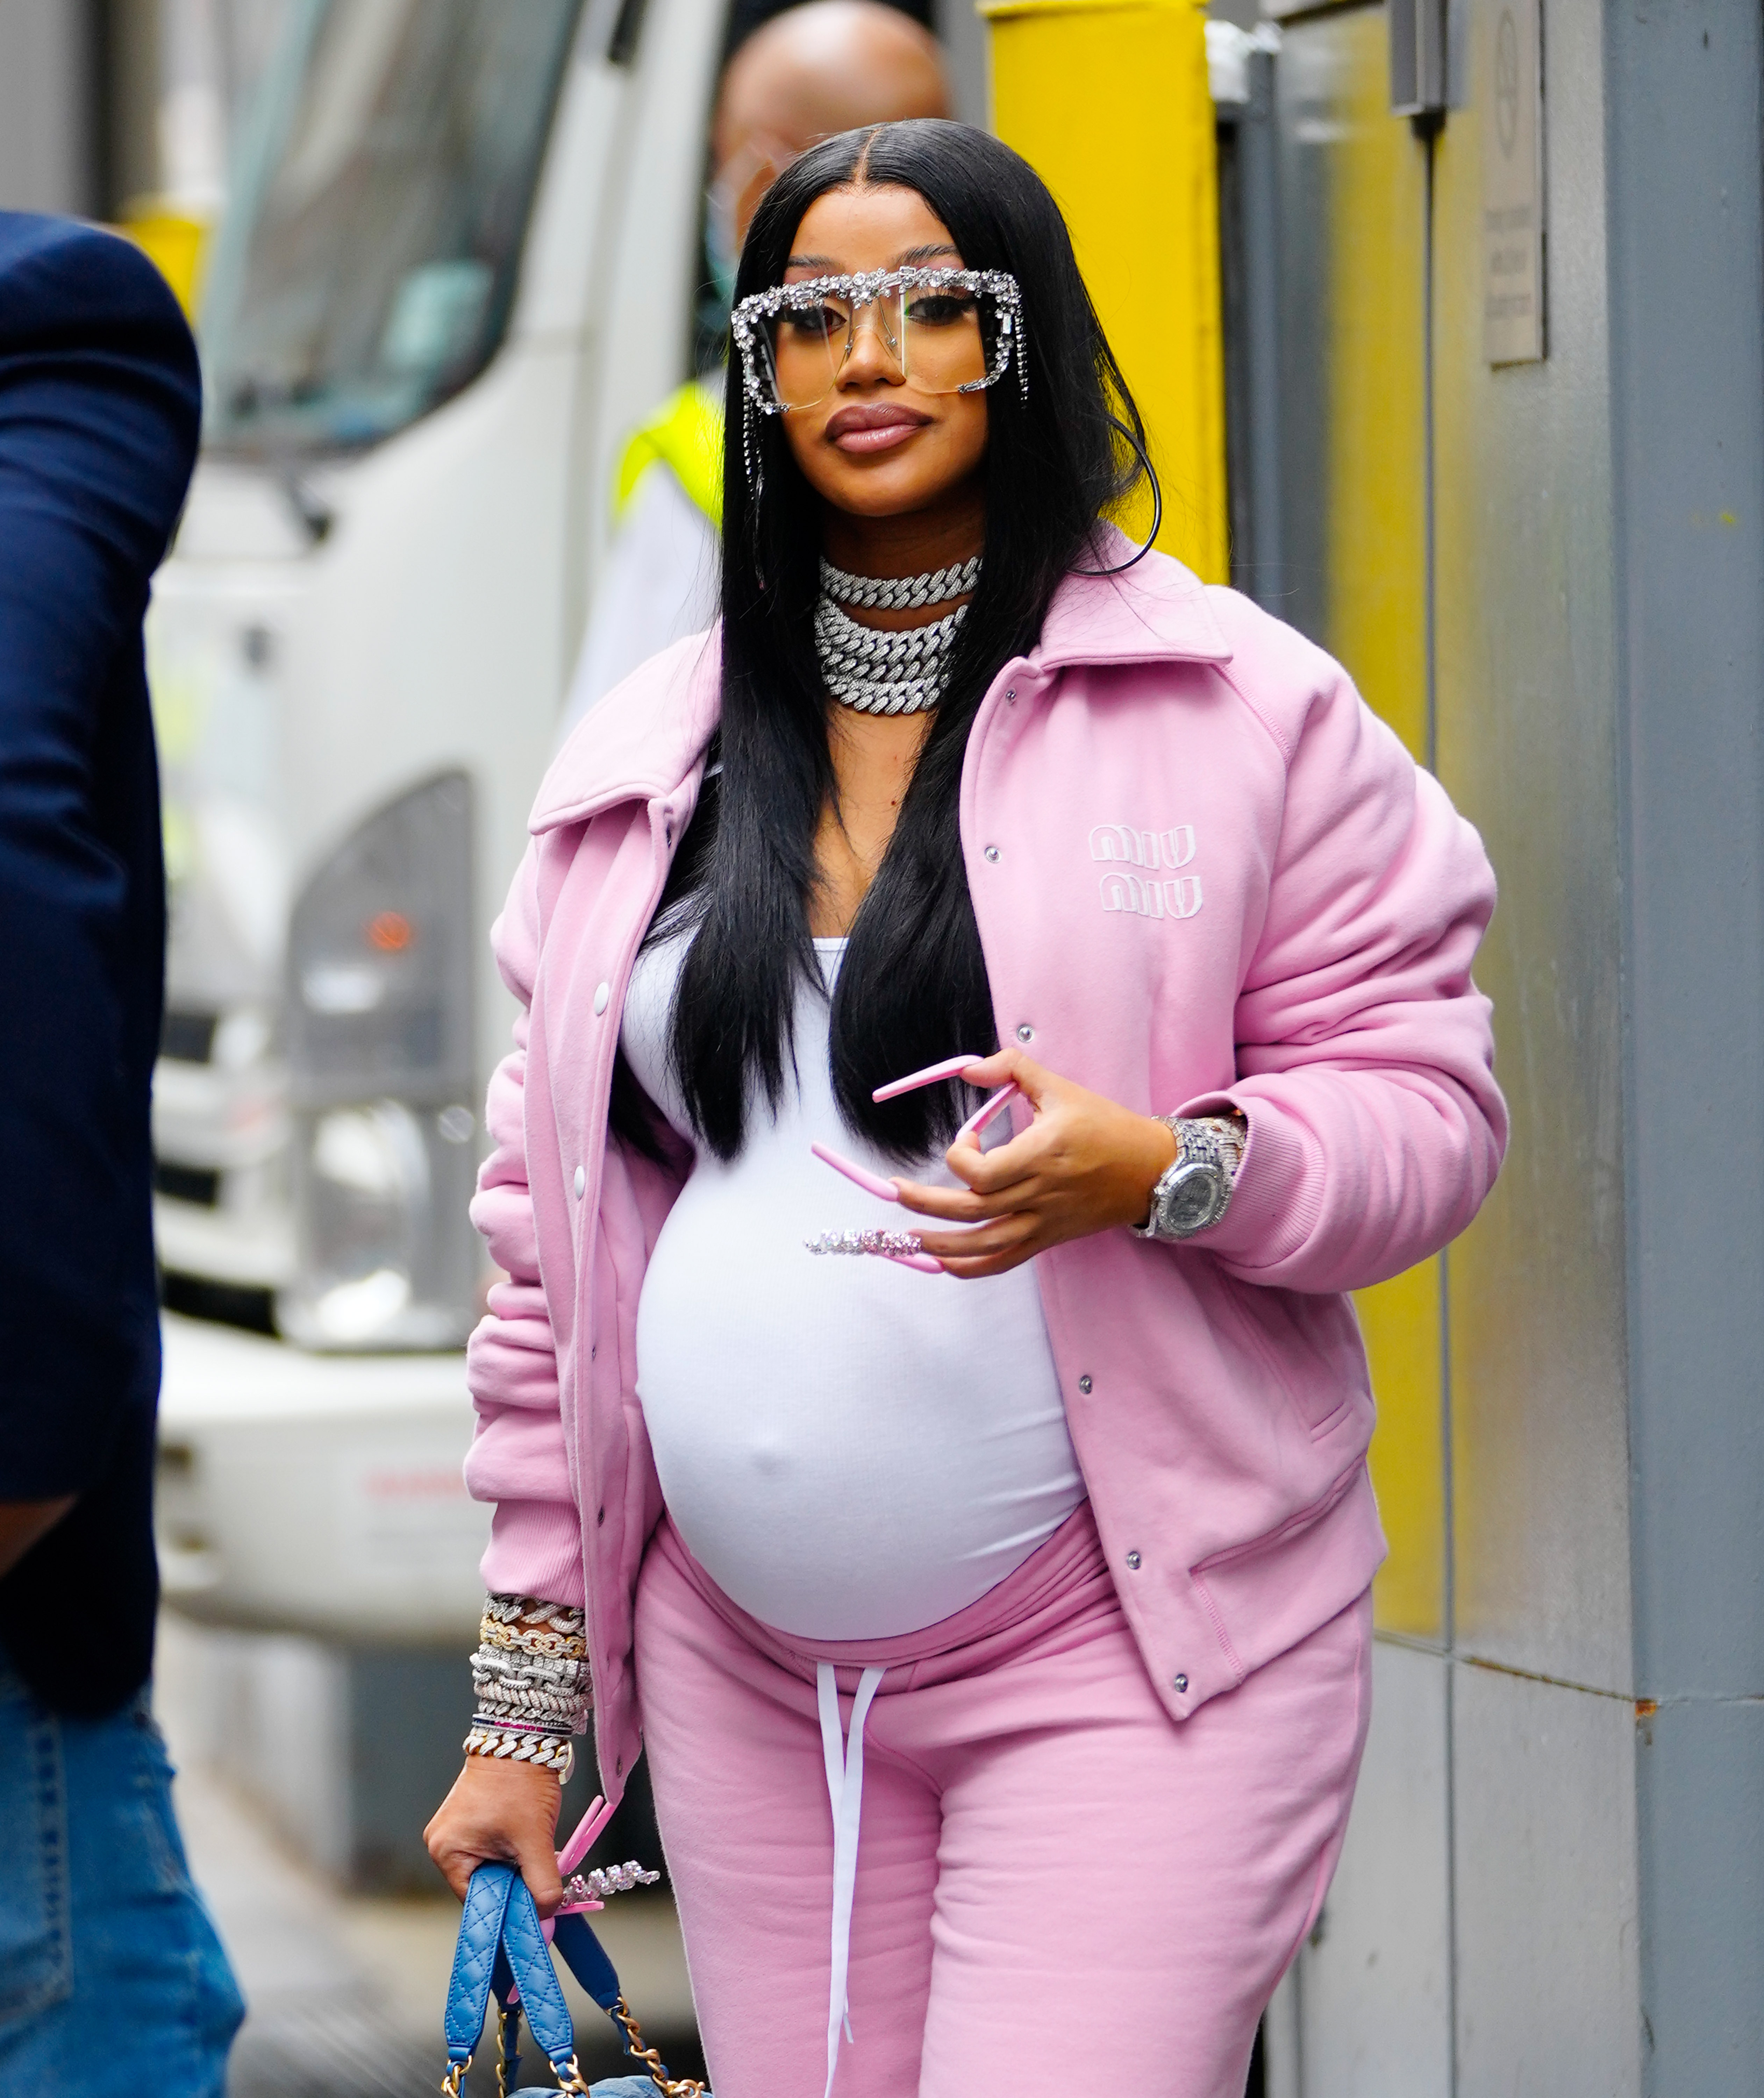 Cardi B in New York City am 30. August 2021 | Quelle: Getty Images